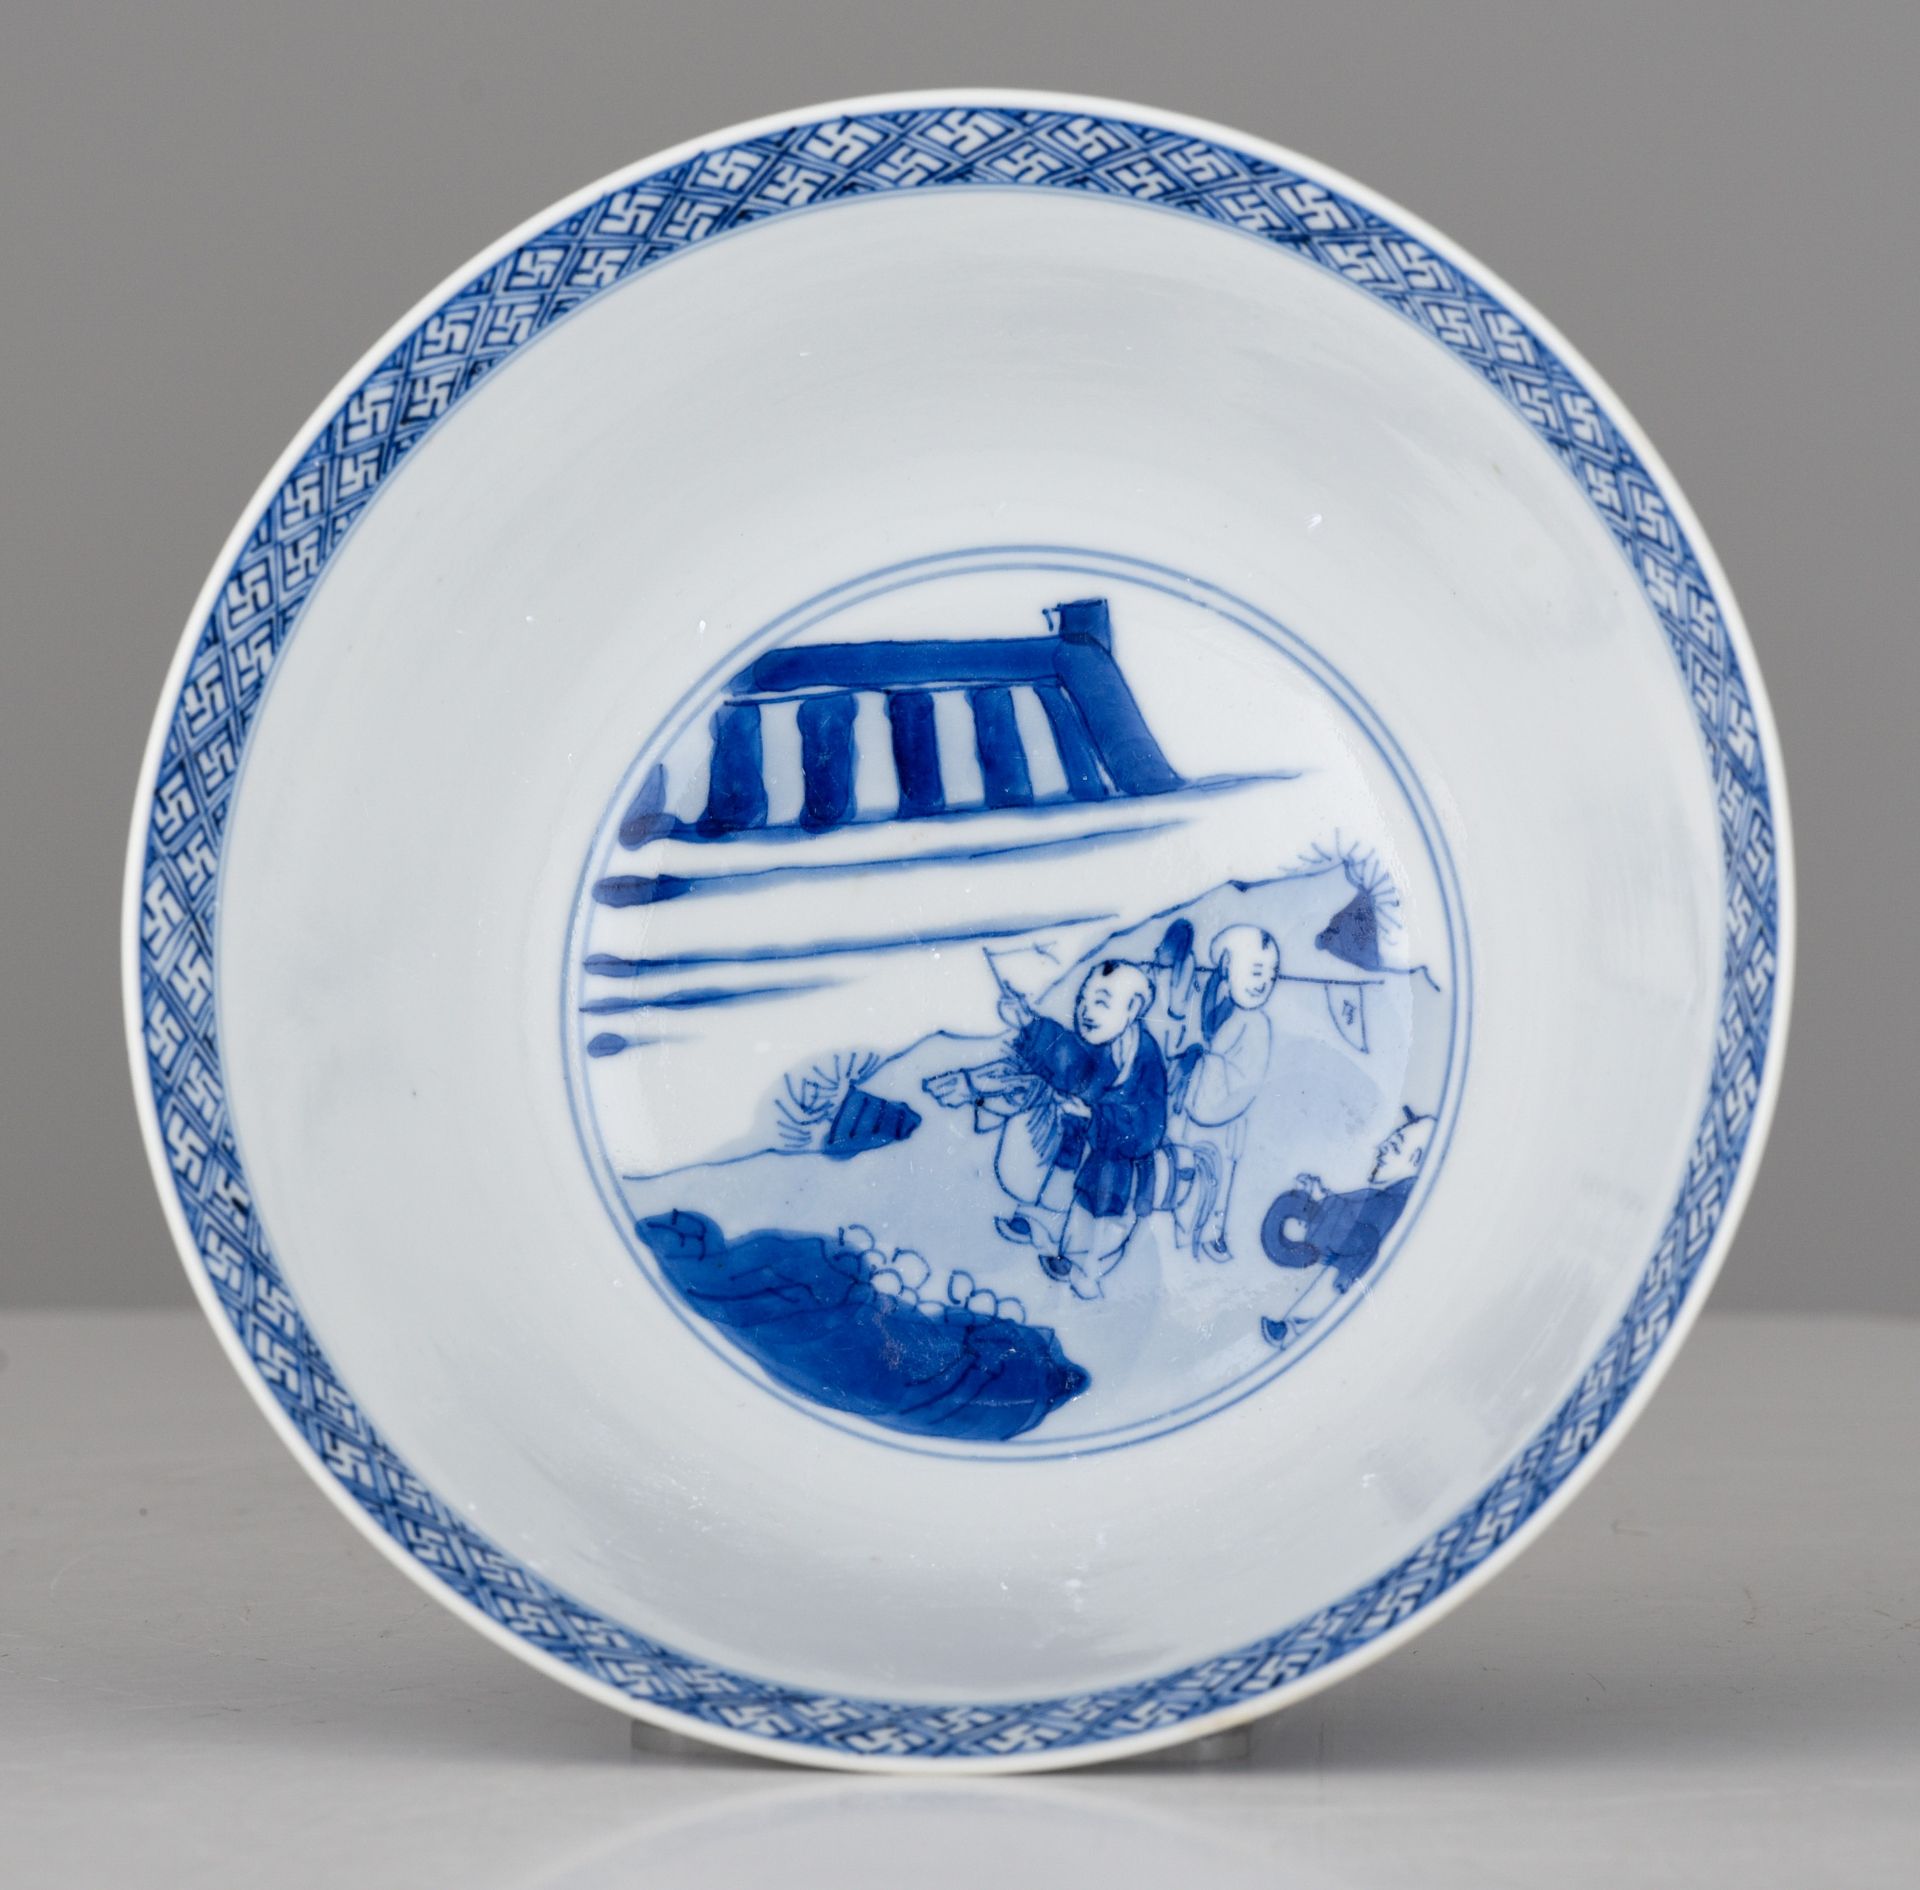 A Chinese blue and white figural bowl, Kangxi mark and of the period, H 7,5 - dia. 16 cm - Image 6 of 7